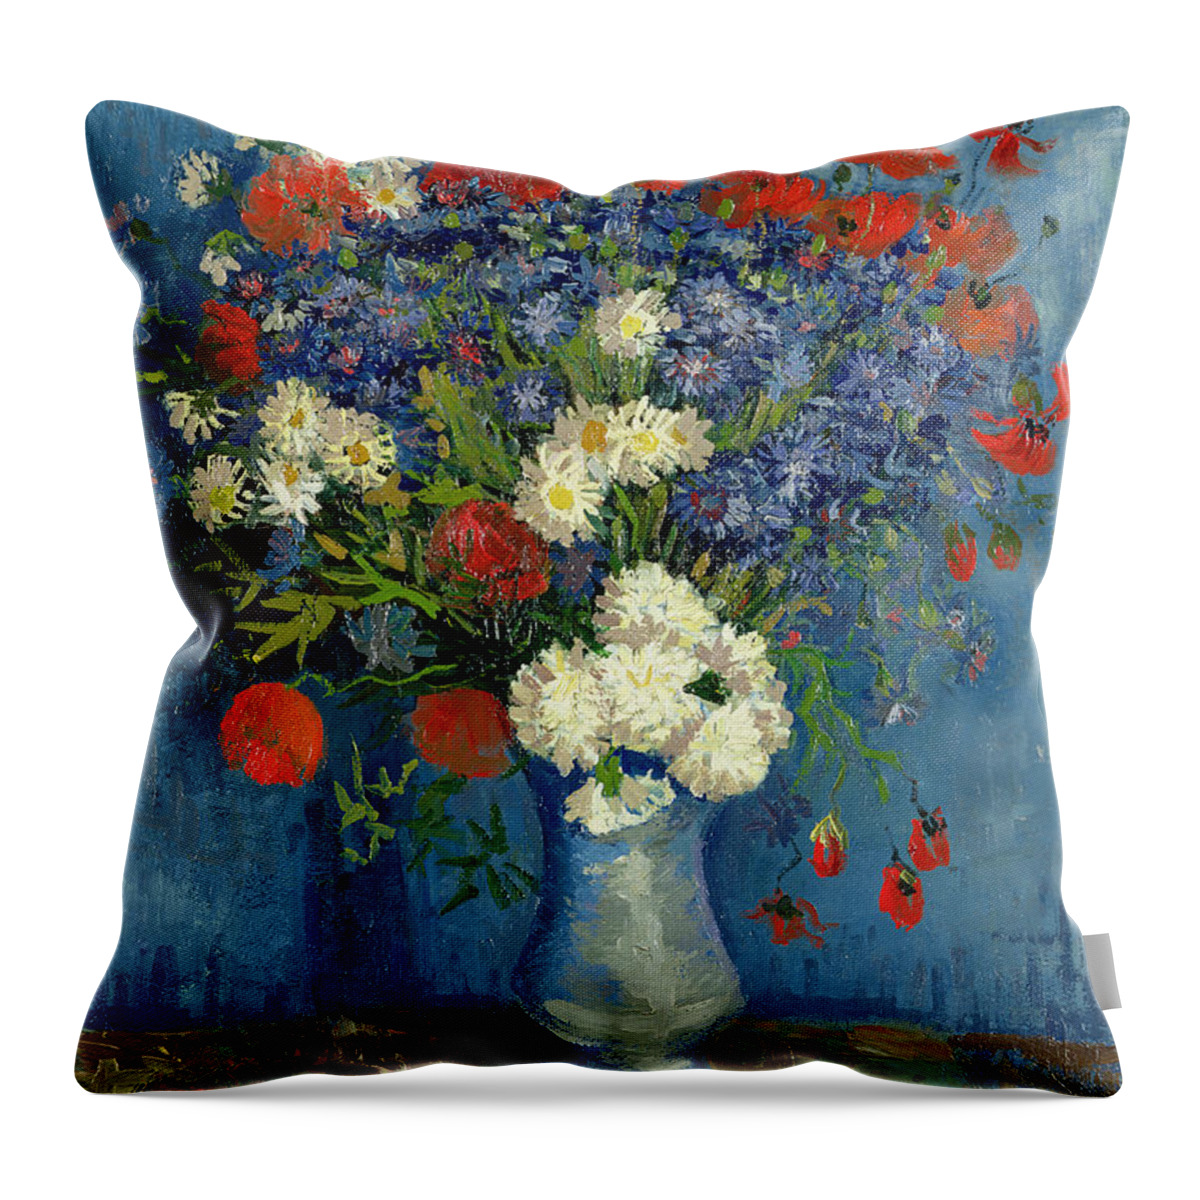 Still Throw Pillow featuring the painting Vase with Cornflowers and Poppies by Vincent Van Gogh